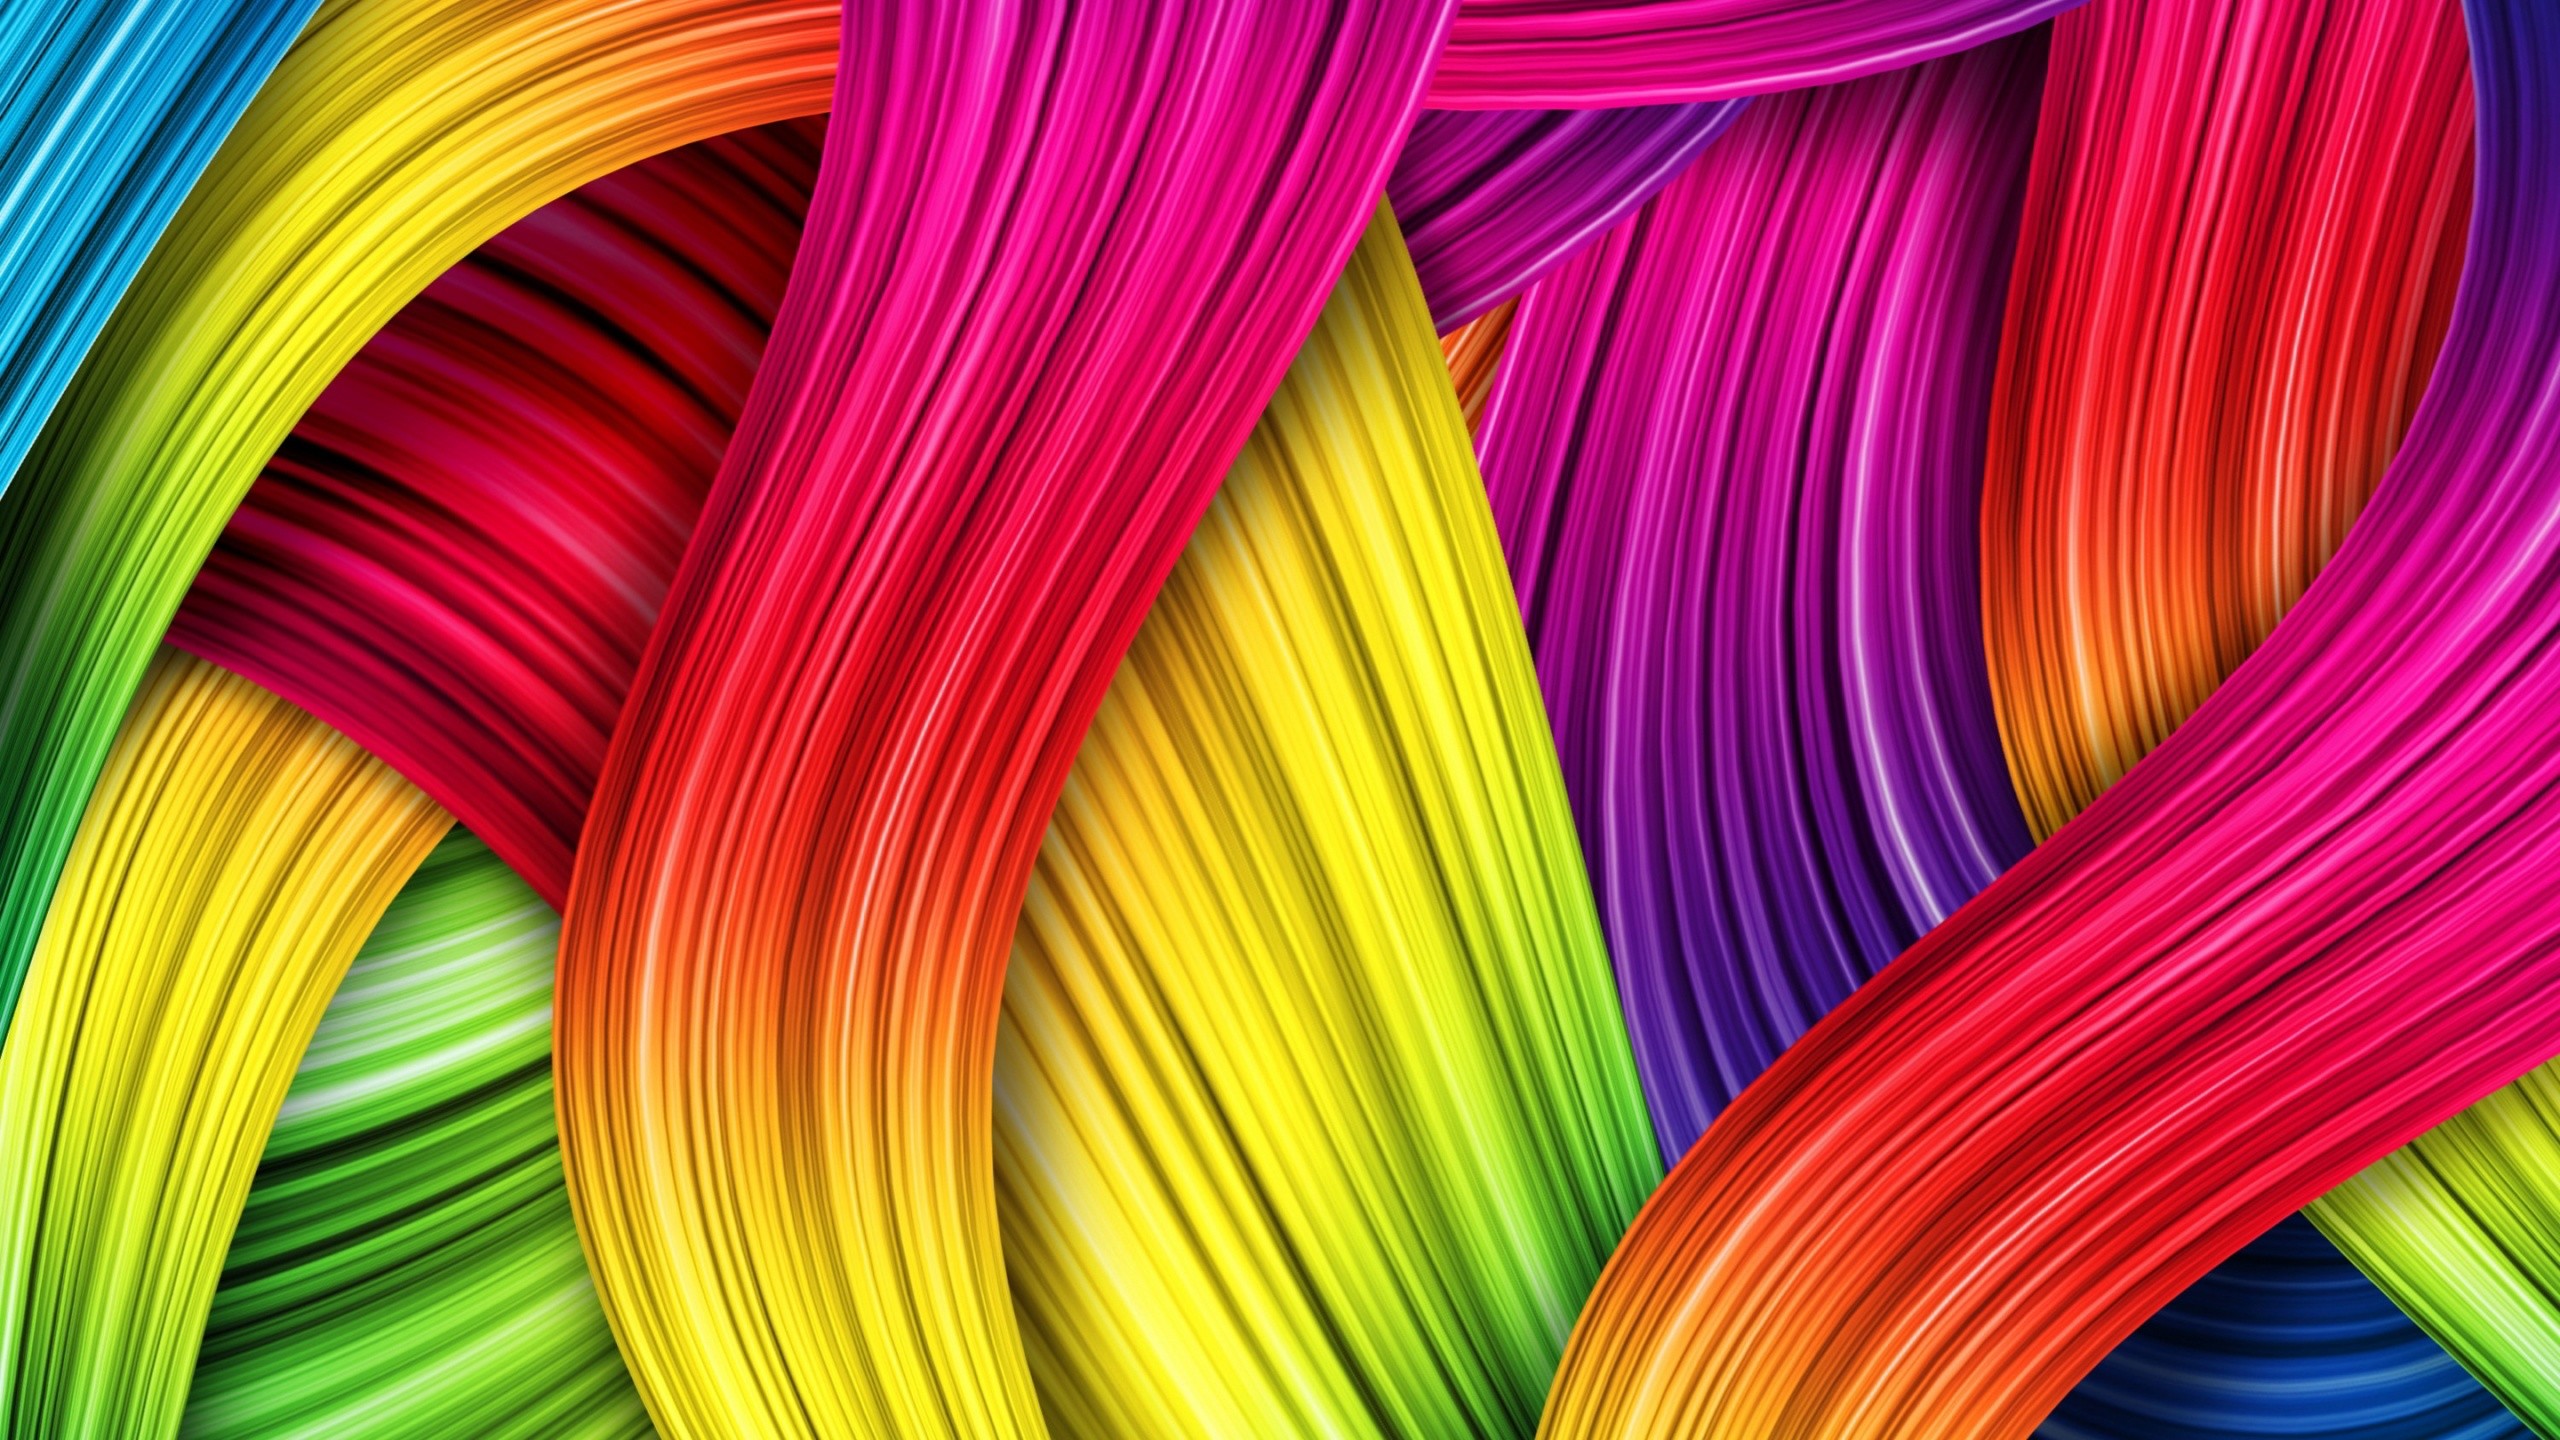 2560x1440 Colorful Abstract